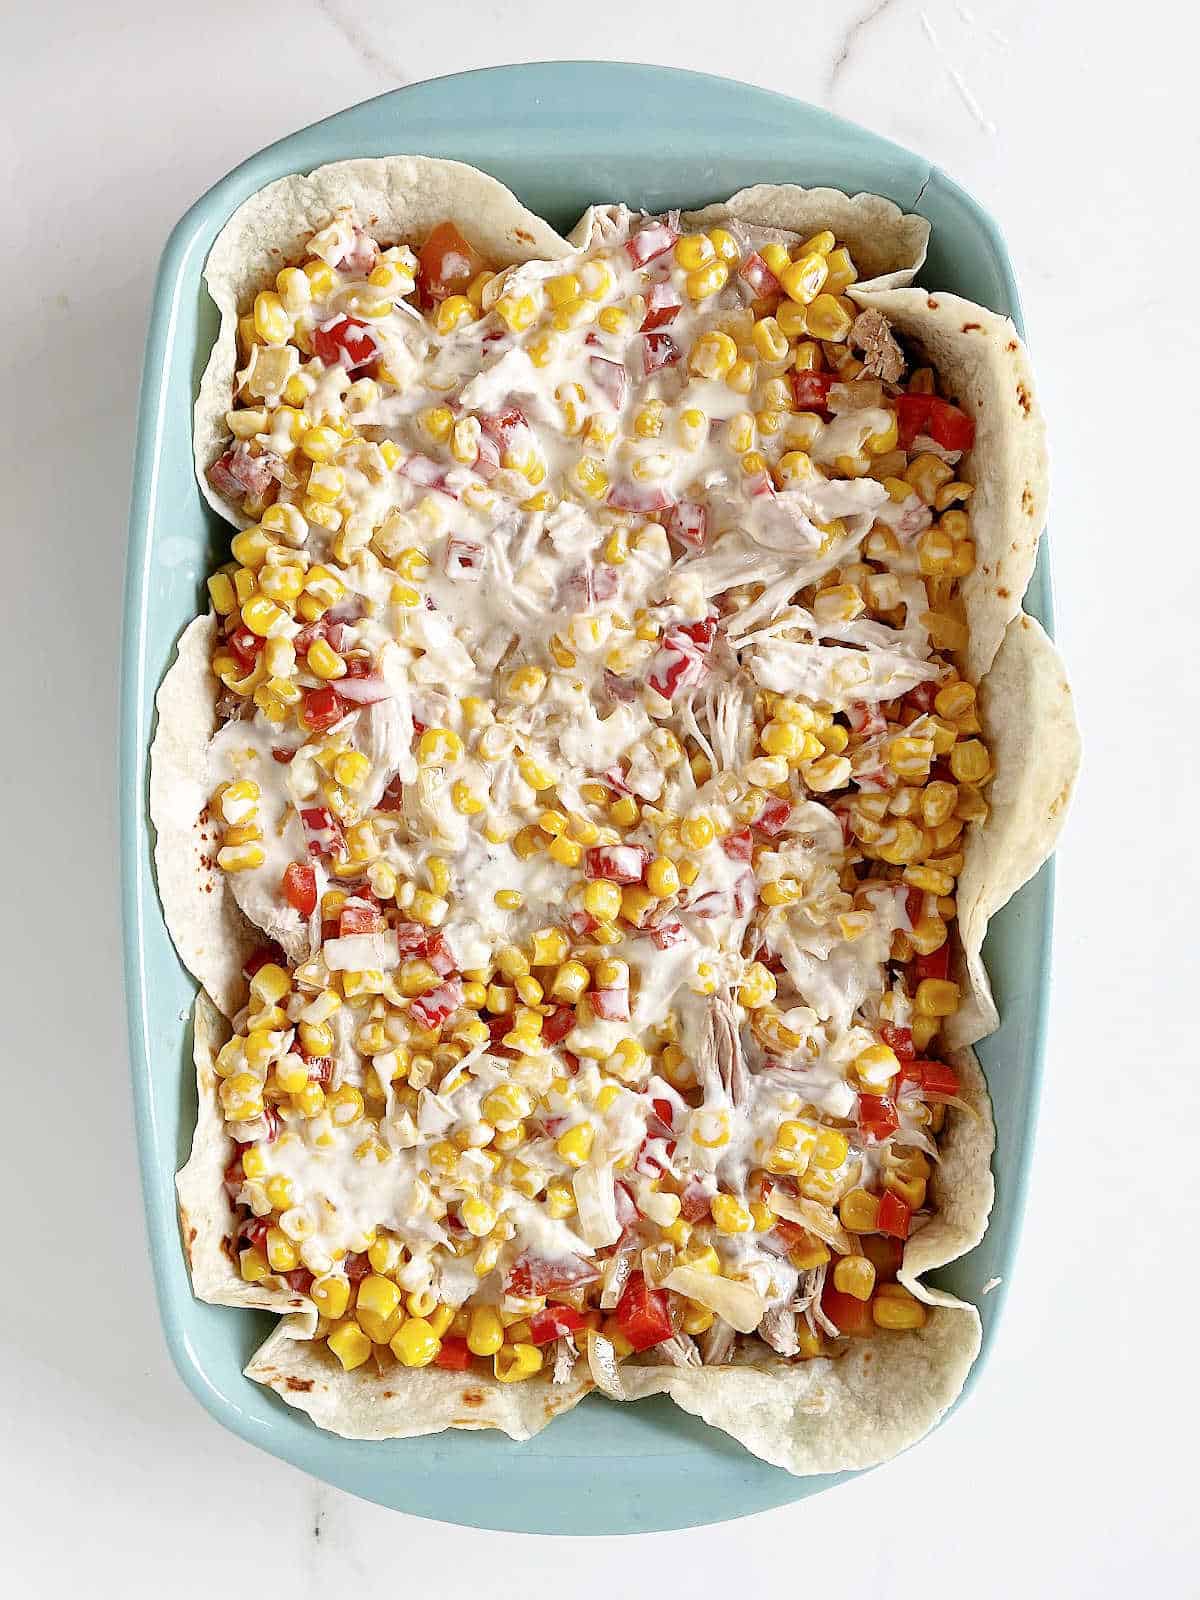 Corn, tomatoes, cream, and tortillas layered in a blue rectangular baking dish on a white marble surface.